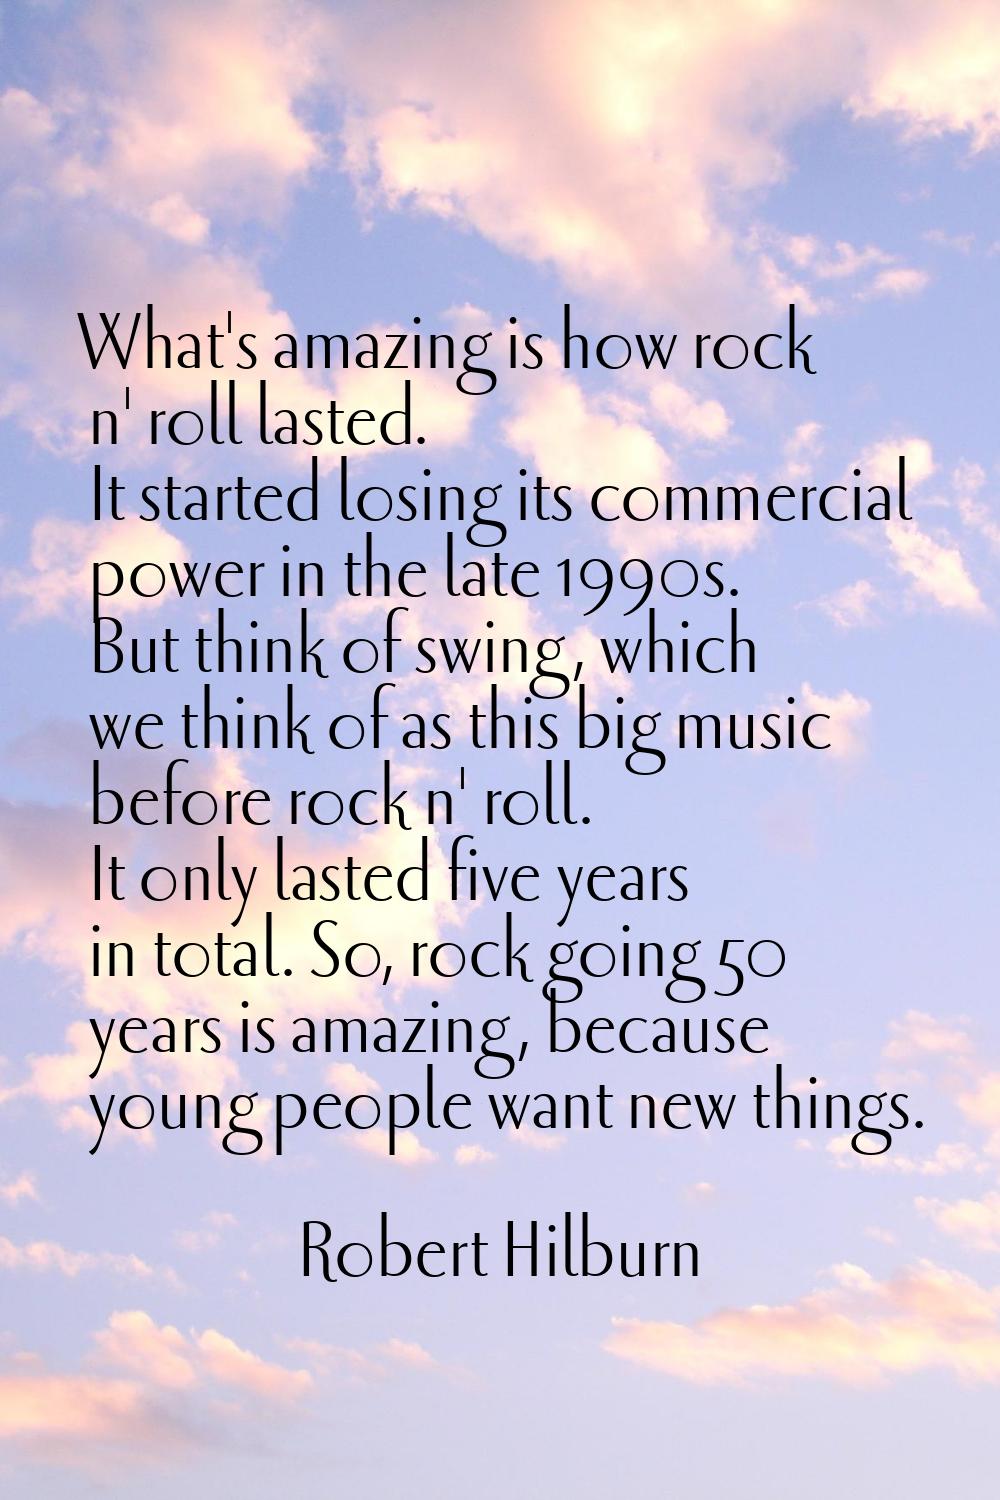 What's amazing is how rock n' roll lasted. It started losing its commercial power in the late 1990s